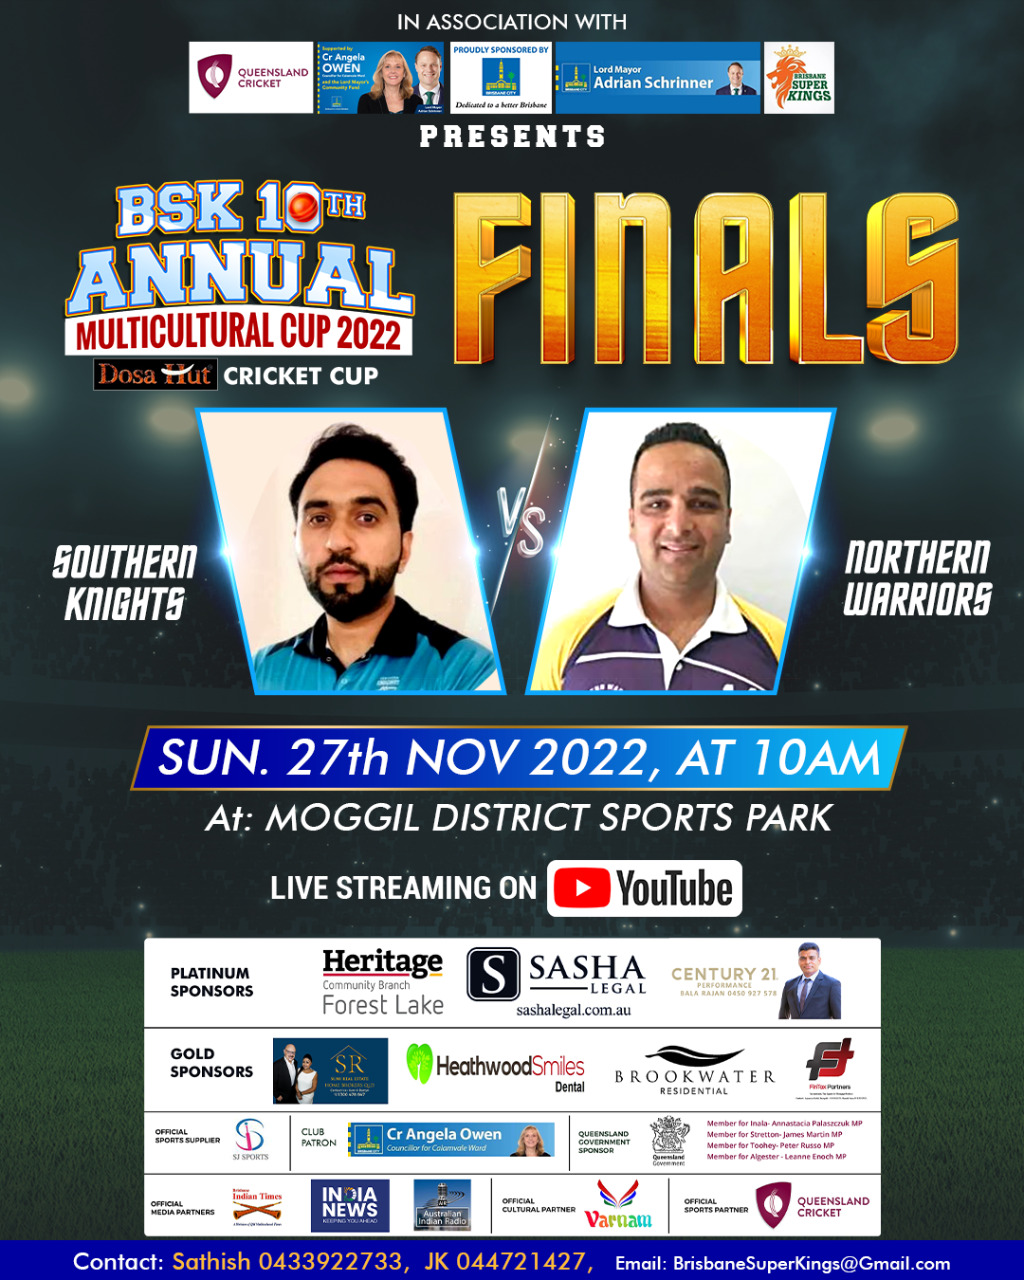 BSK 10th Annual Multicultural Cup 2022 FINALS